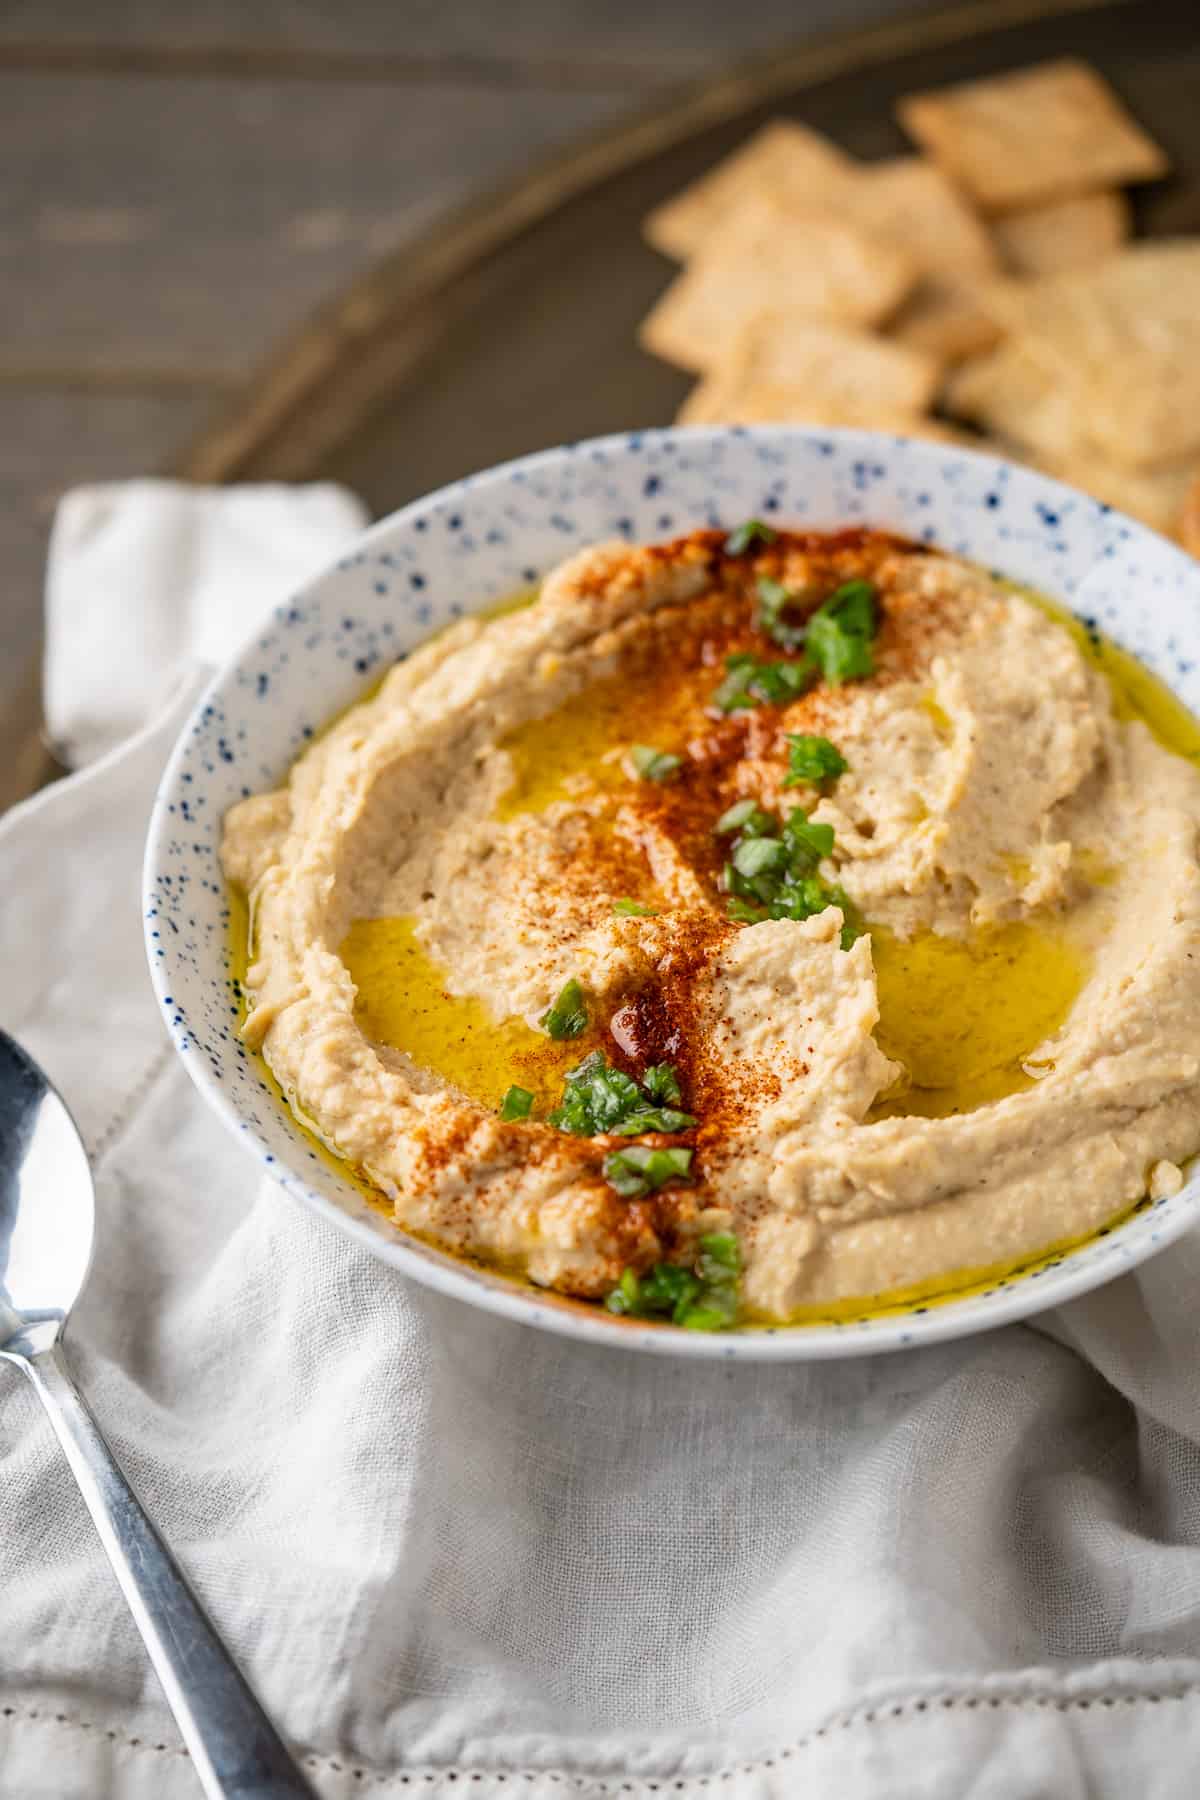 A close up of homemade chickpea hummus to show the creamy texture.